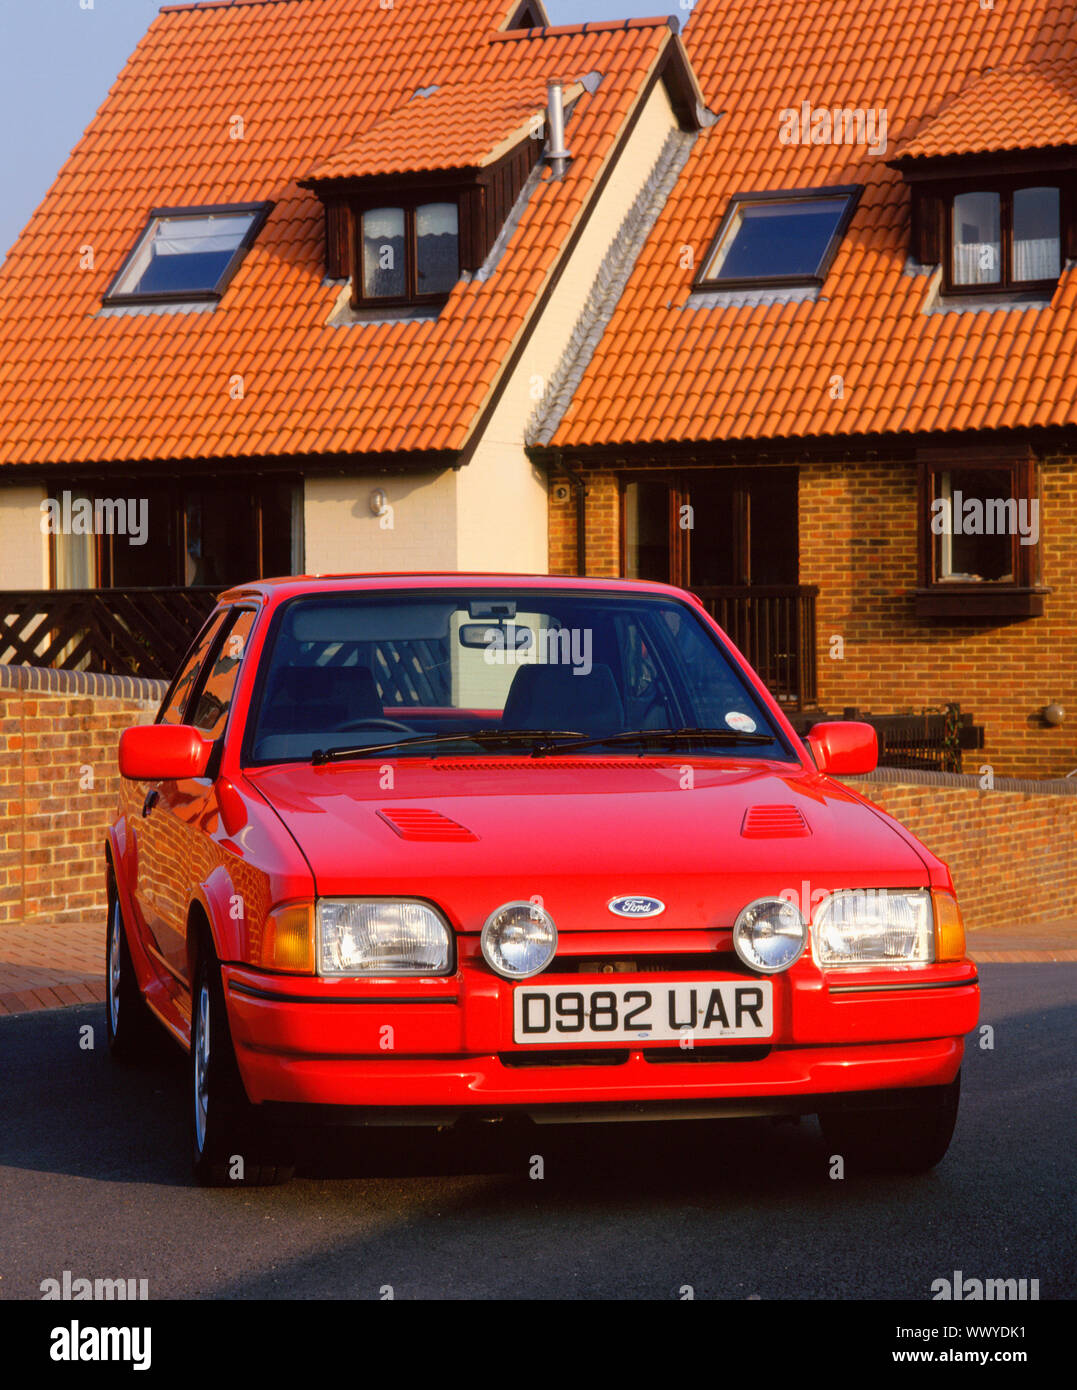 1987 Ford Escort RS Turbo. Banque D'Images